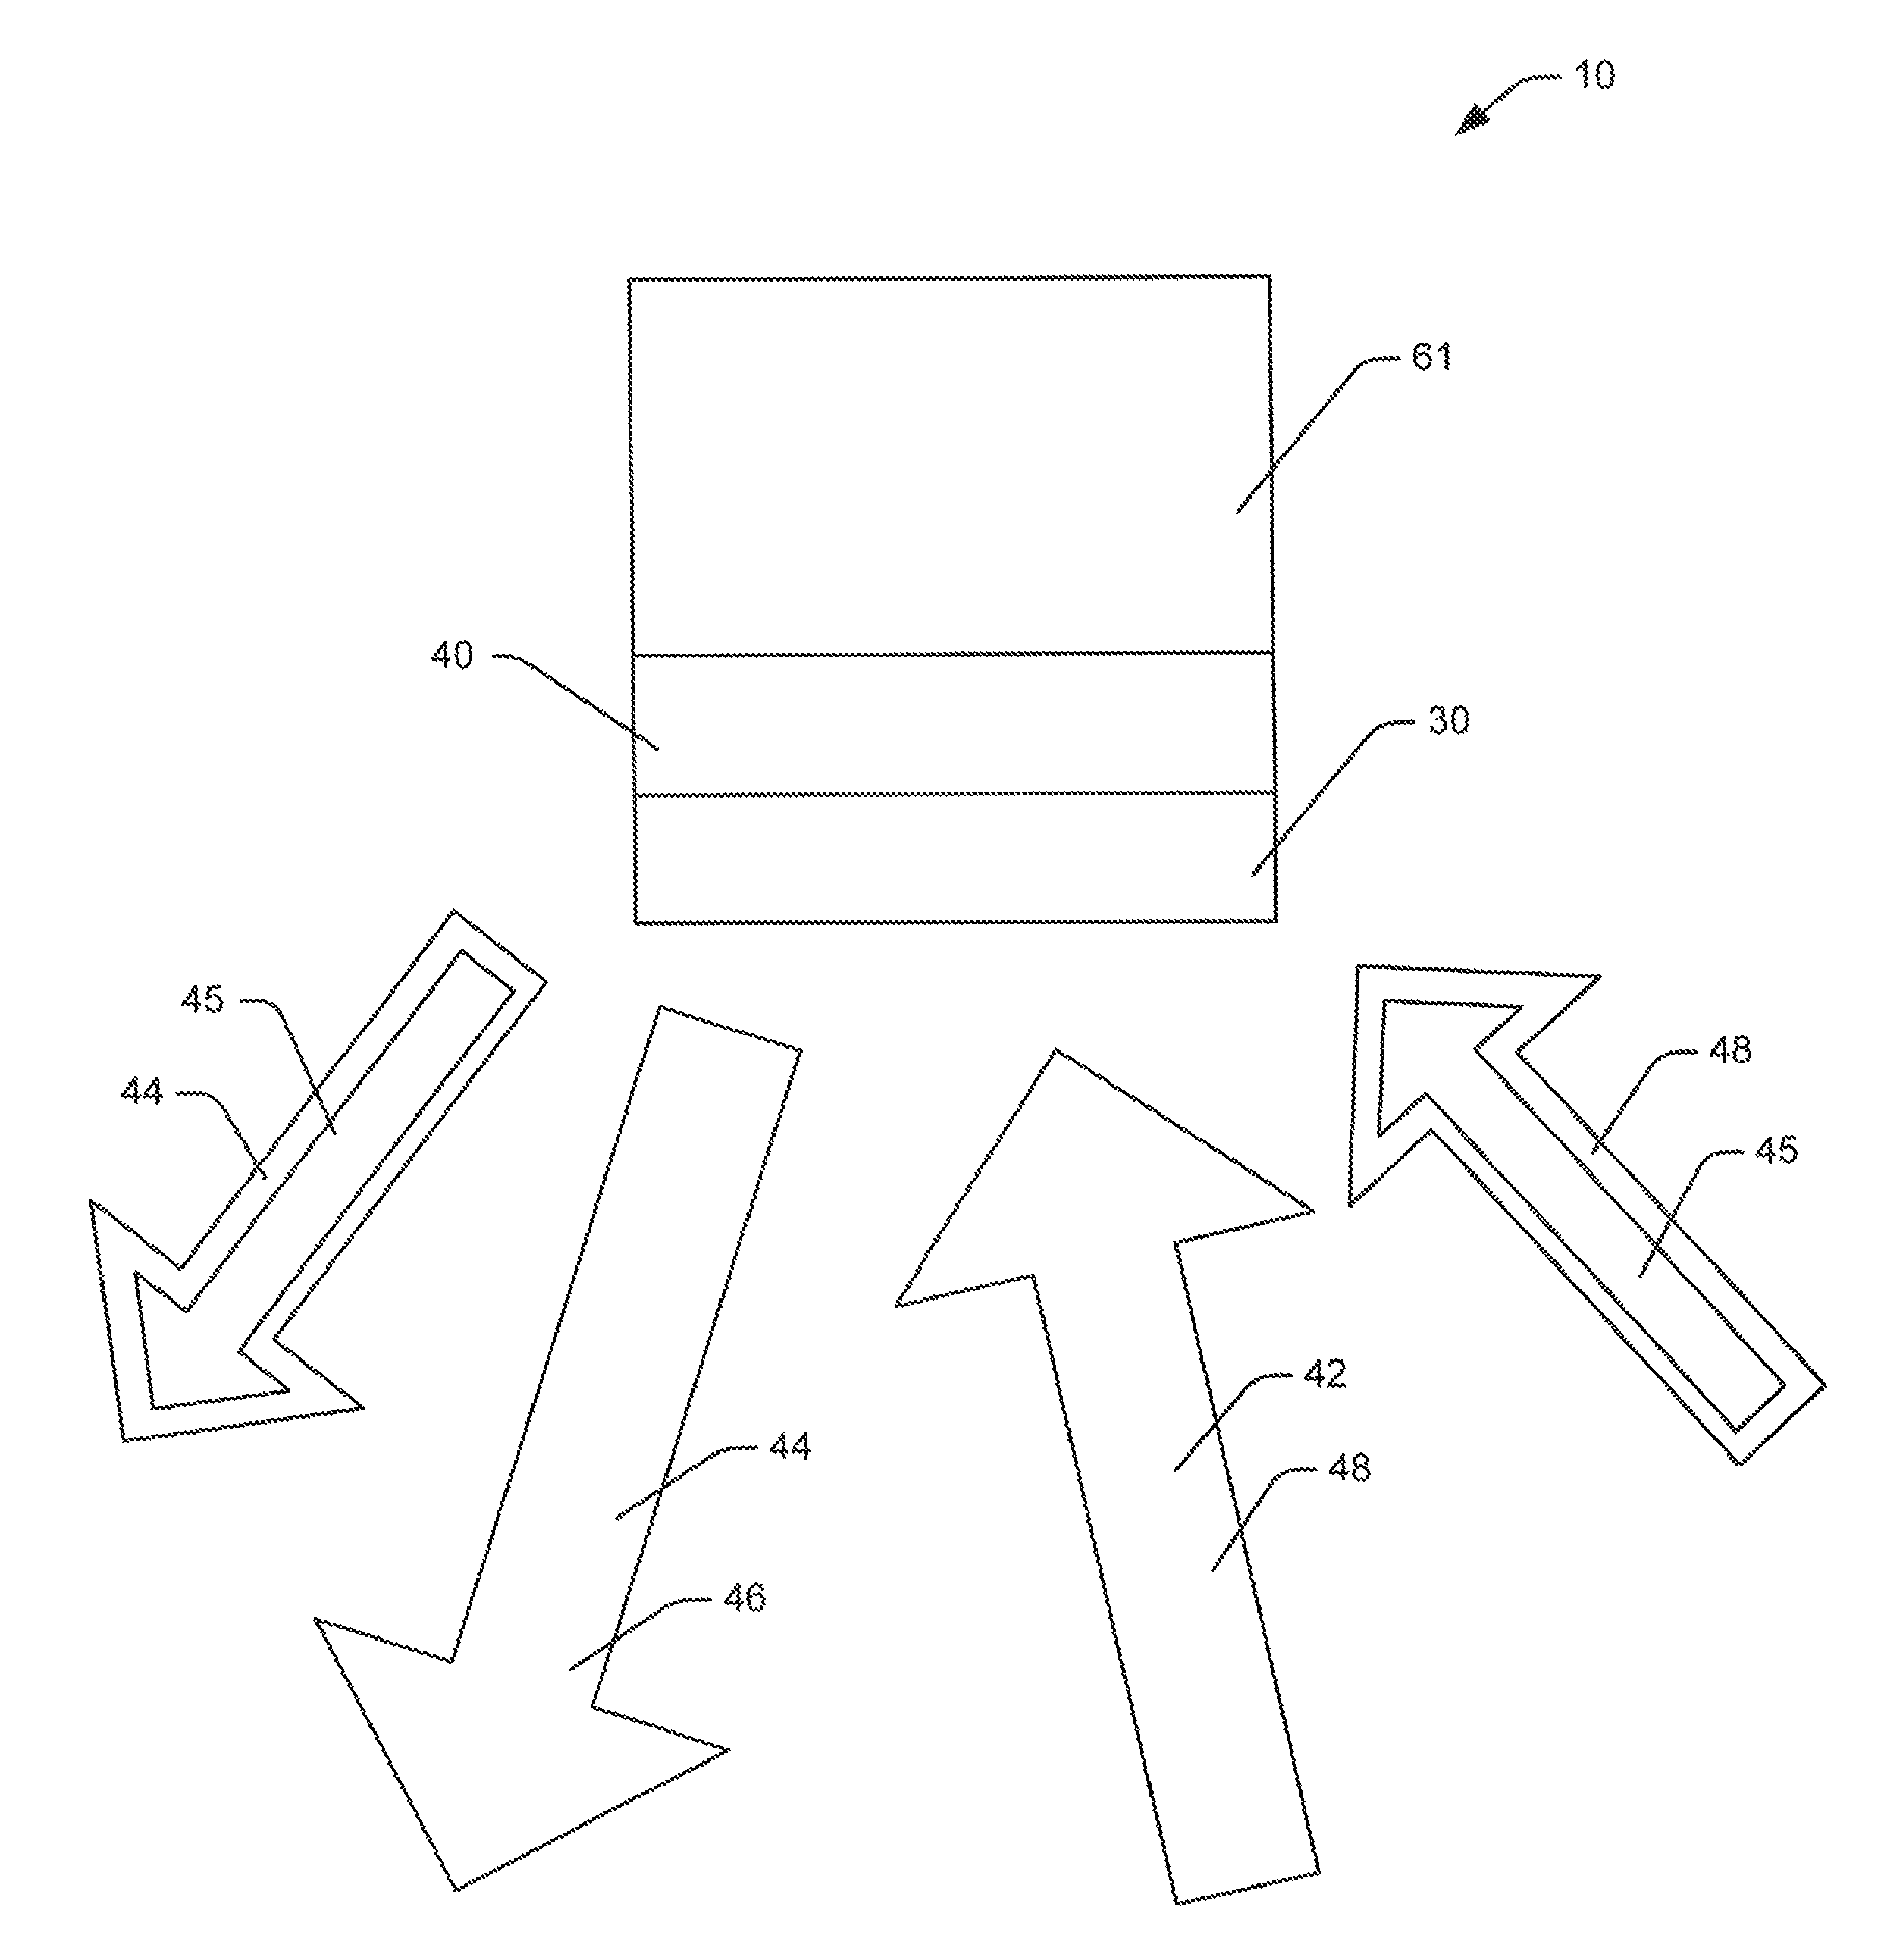 Wavelength sensing lighting system and associated methods for national security application